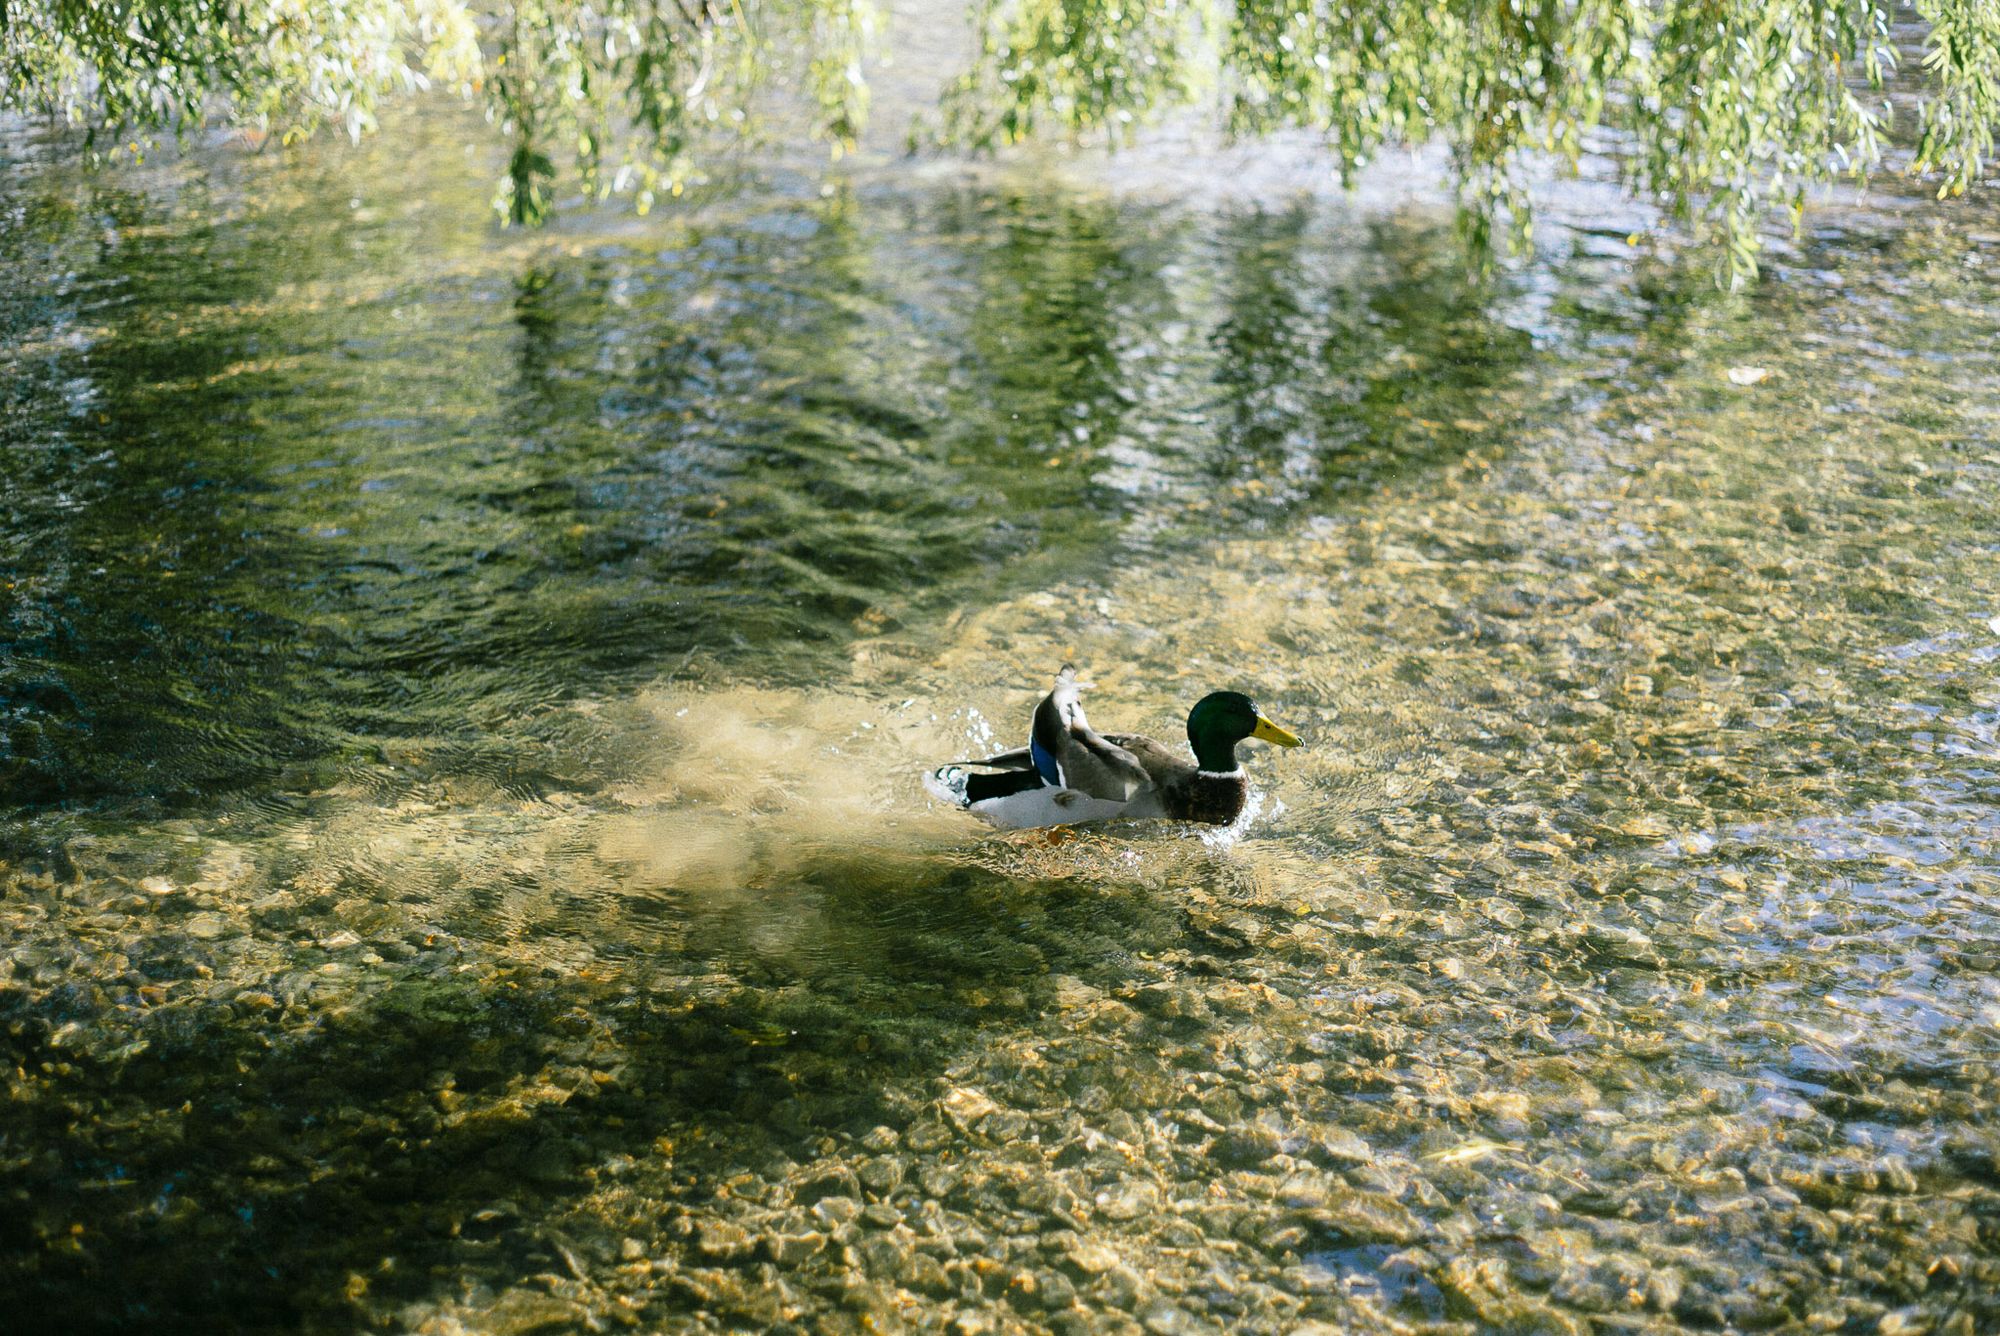 A duck plays in a river.